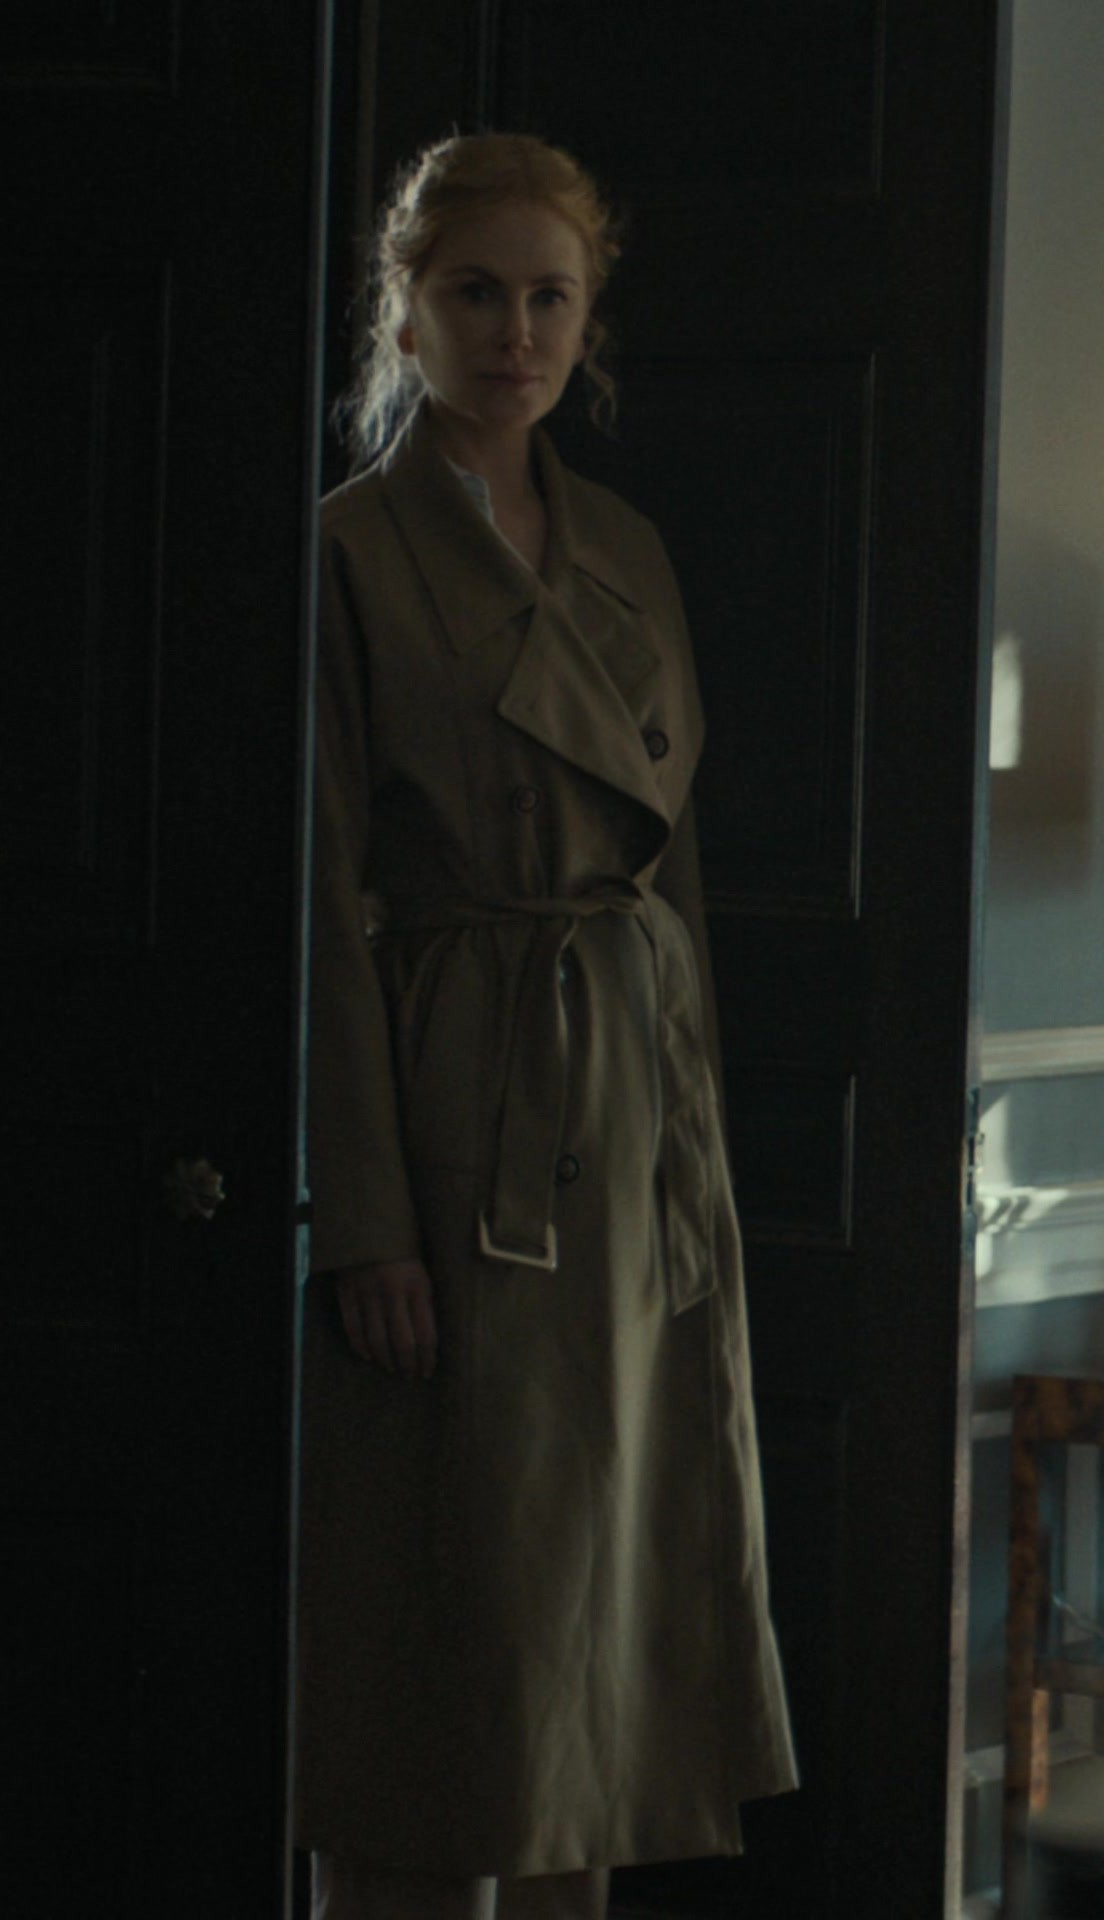 Worn on Special Ops: Lioness TV Show - Long Trench Coat Worn by Nicole Kidman as Kaitlyn Meade